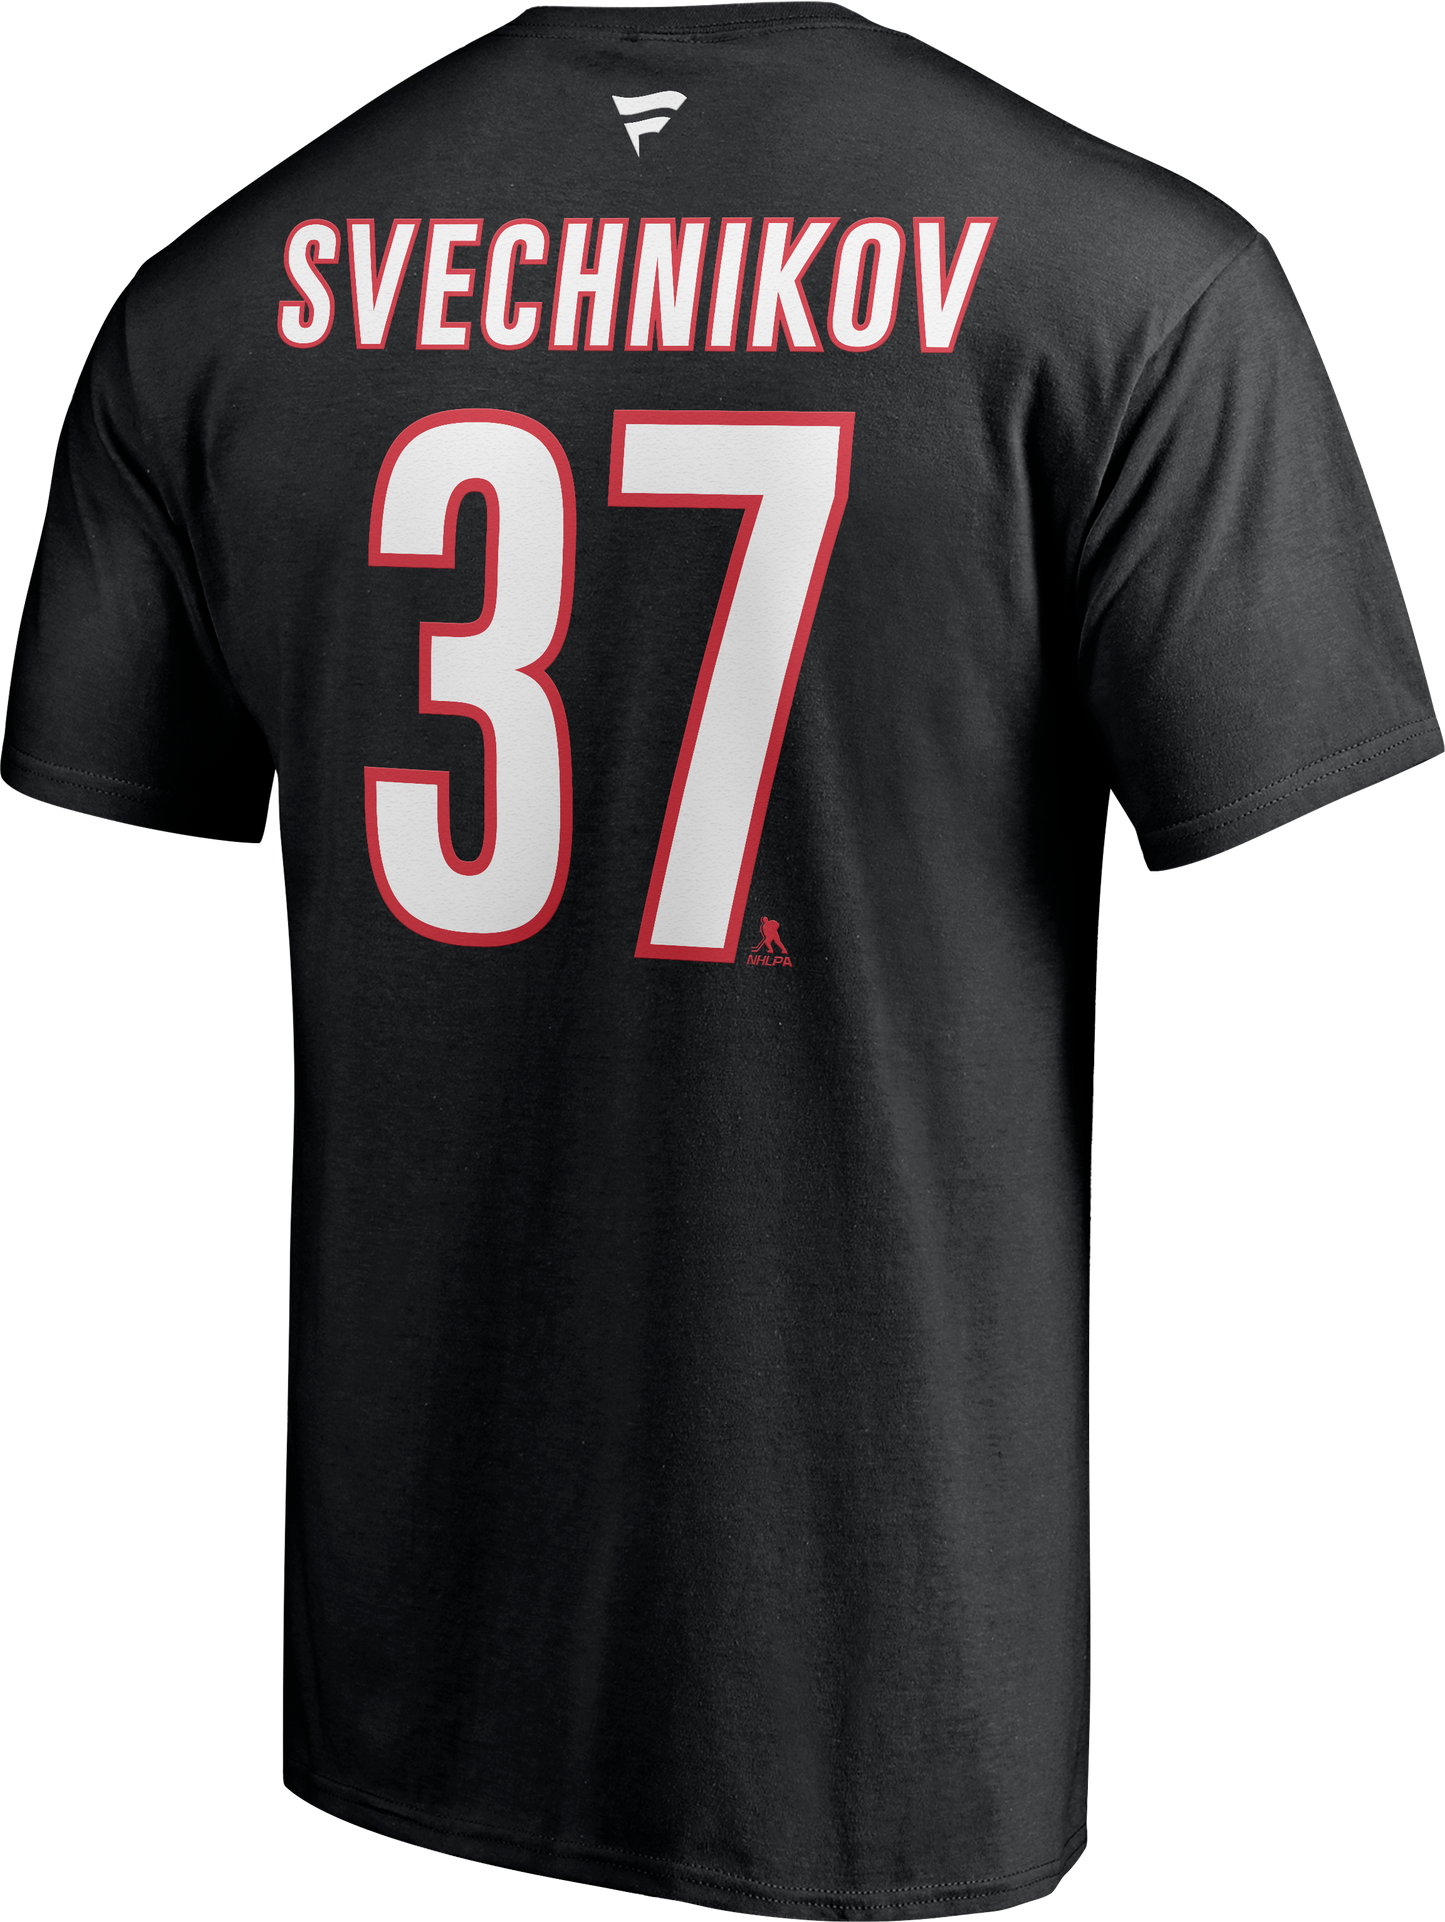 Back View: Black tee with Svechnikov #37 in white and red with fanatics logo